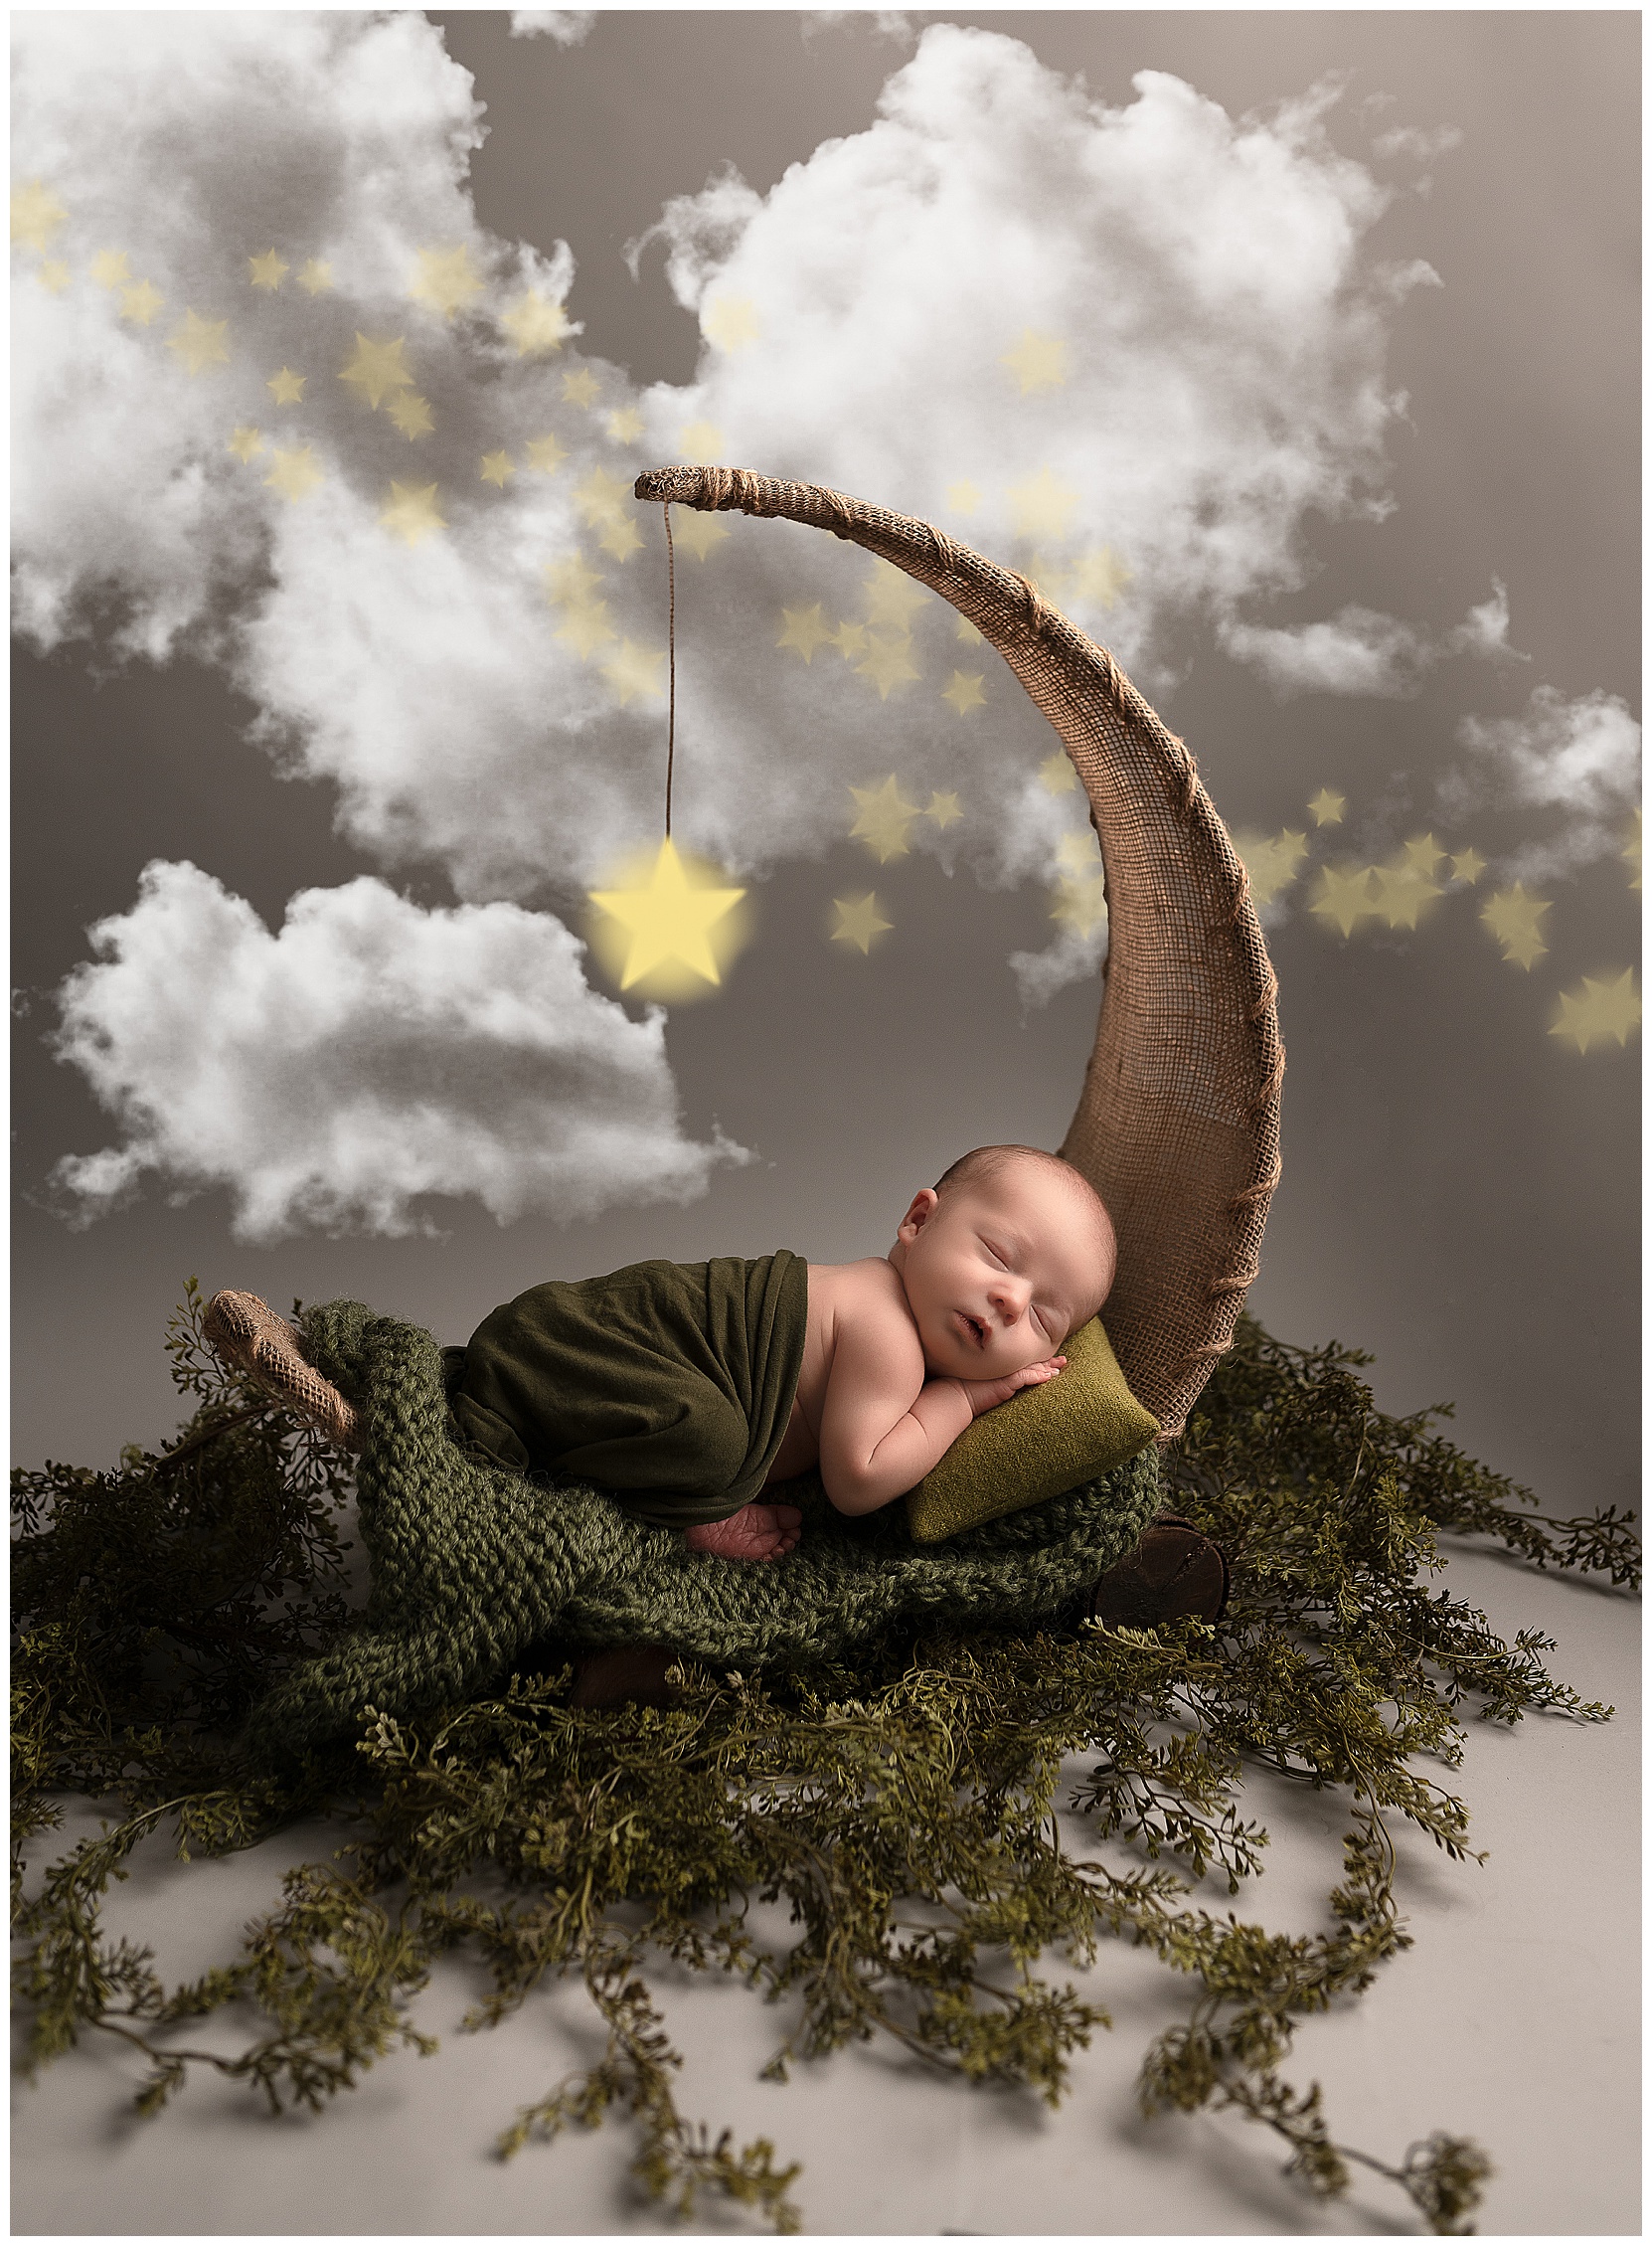 baby sleeping on a moon prop surrounded by clouds and stars.